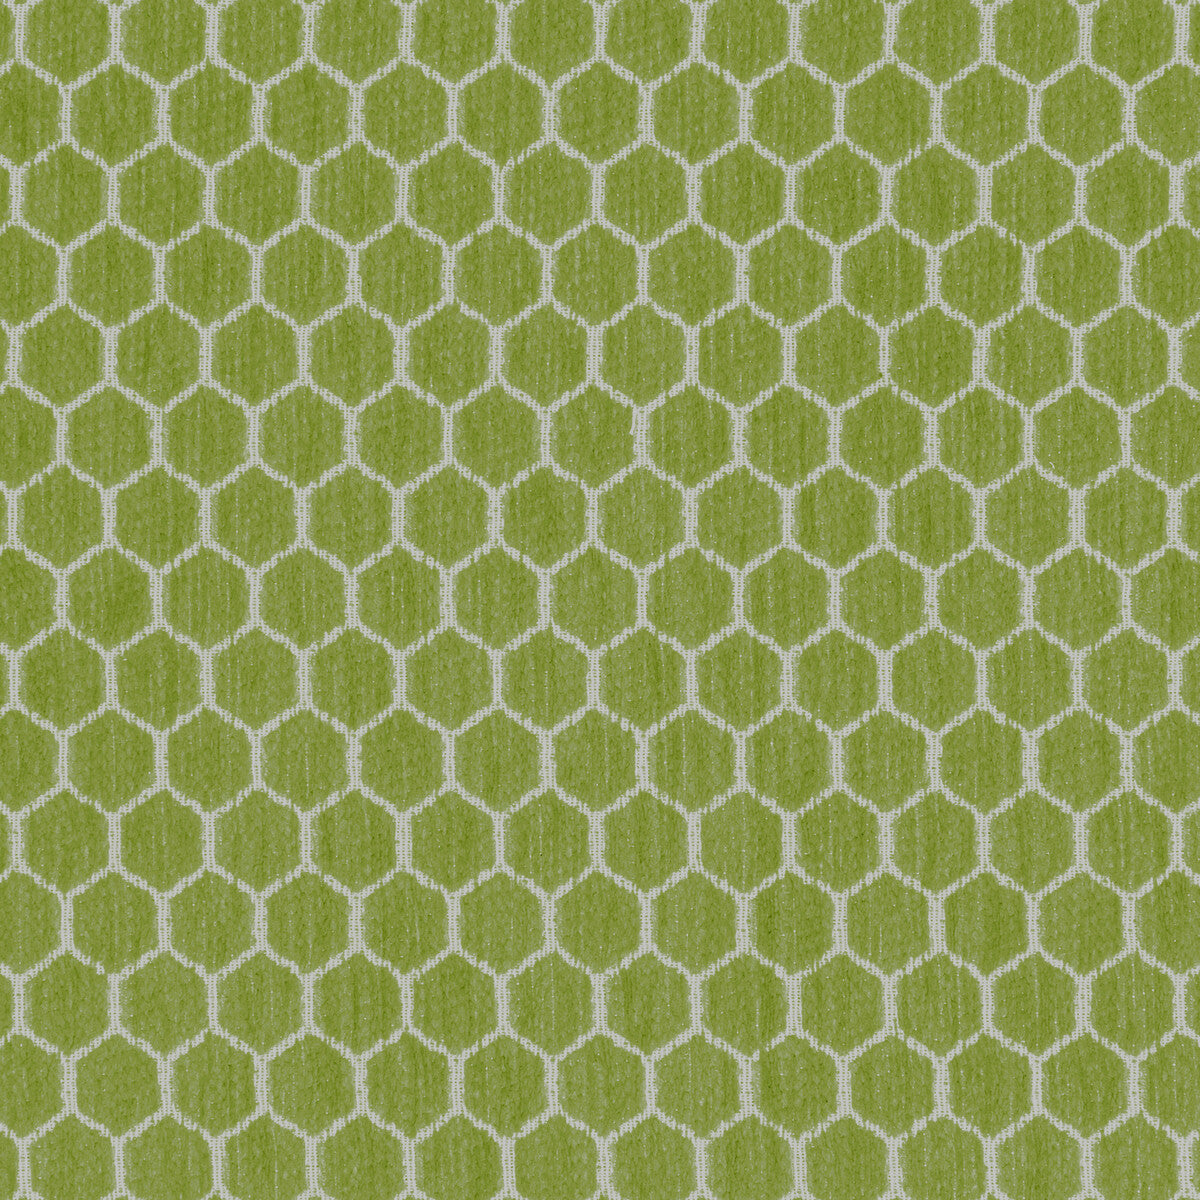 Kravet Design fabric in 36081-23 color - pattern 36081.23.0 - by Kravet Design in the Inside Out Performance Fabrics collection